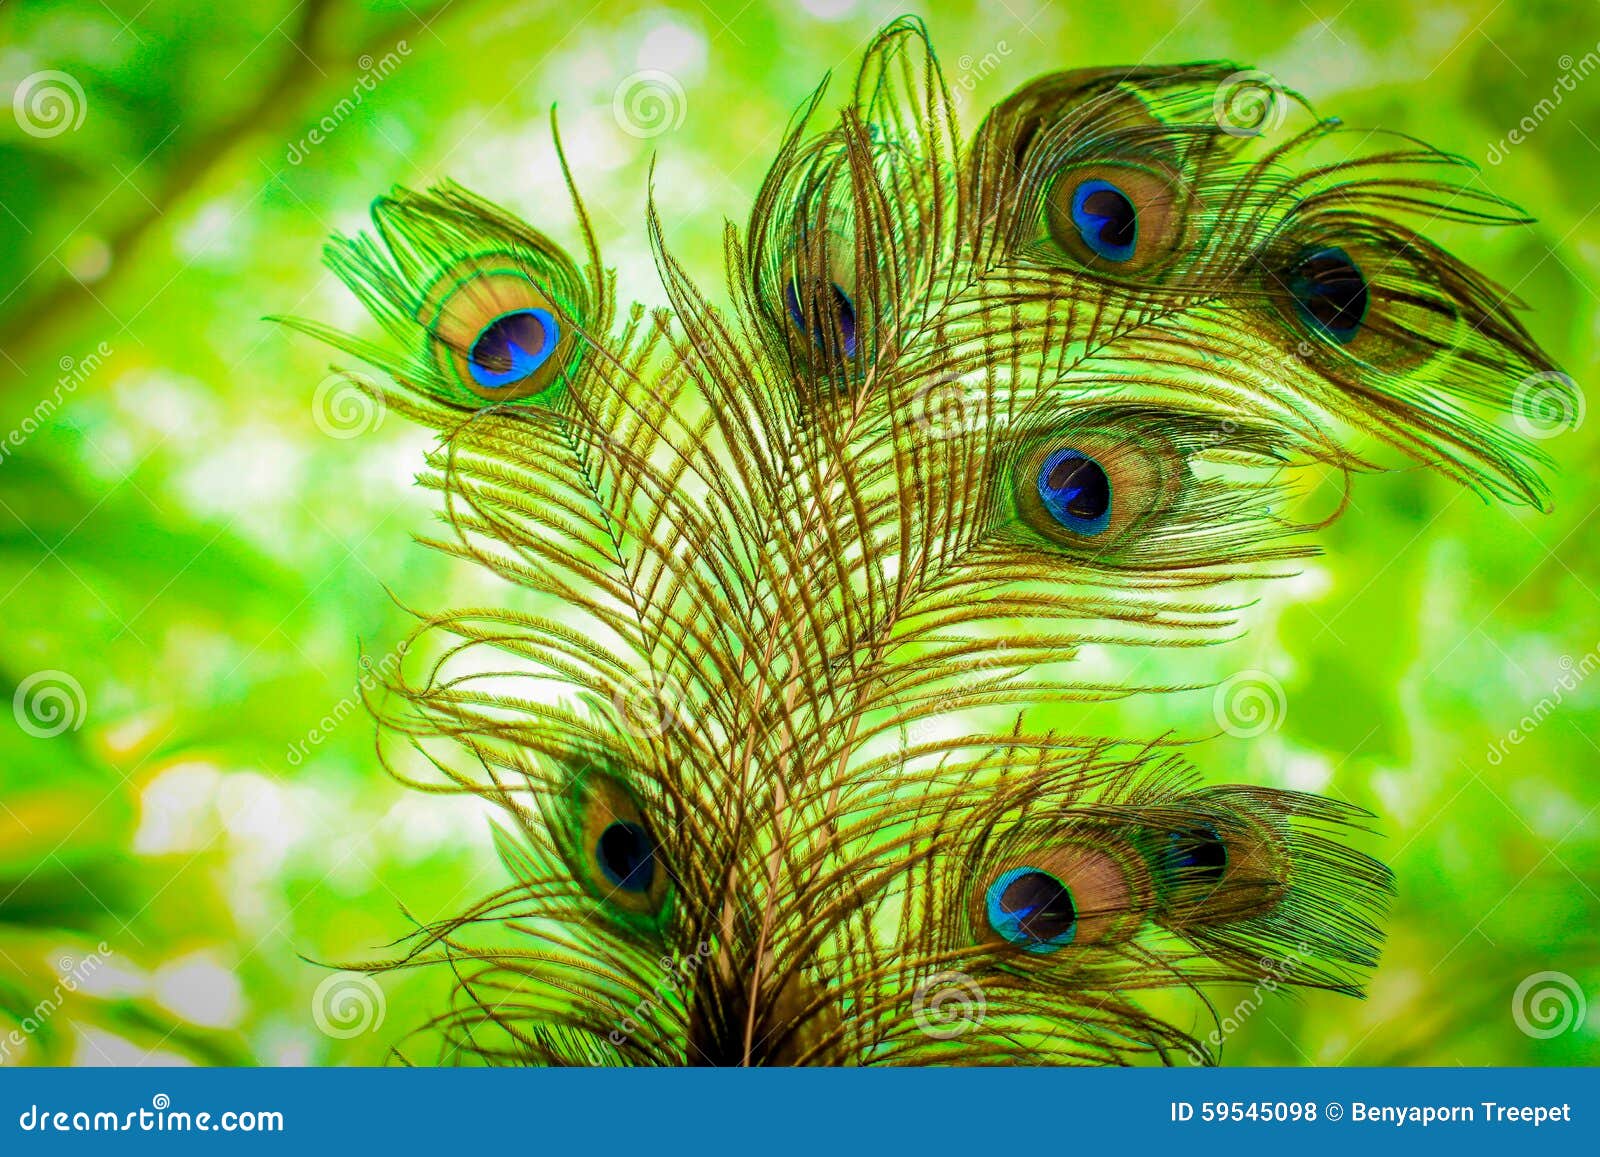 Close-up of Beautiful Peacock Feathers on Green Background. Stock ...